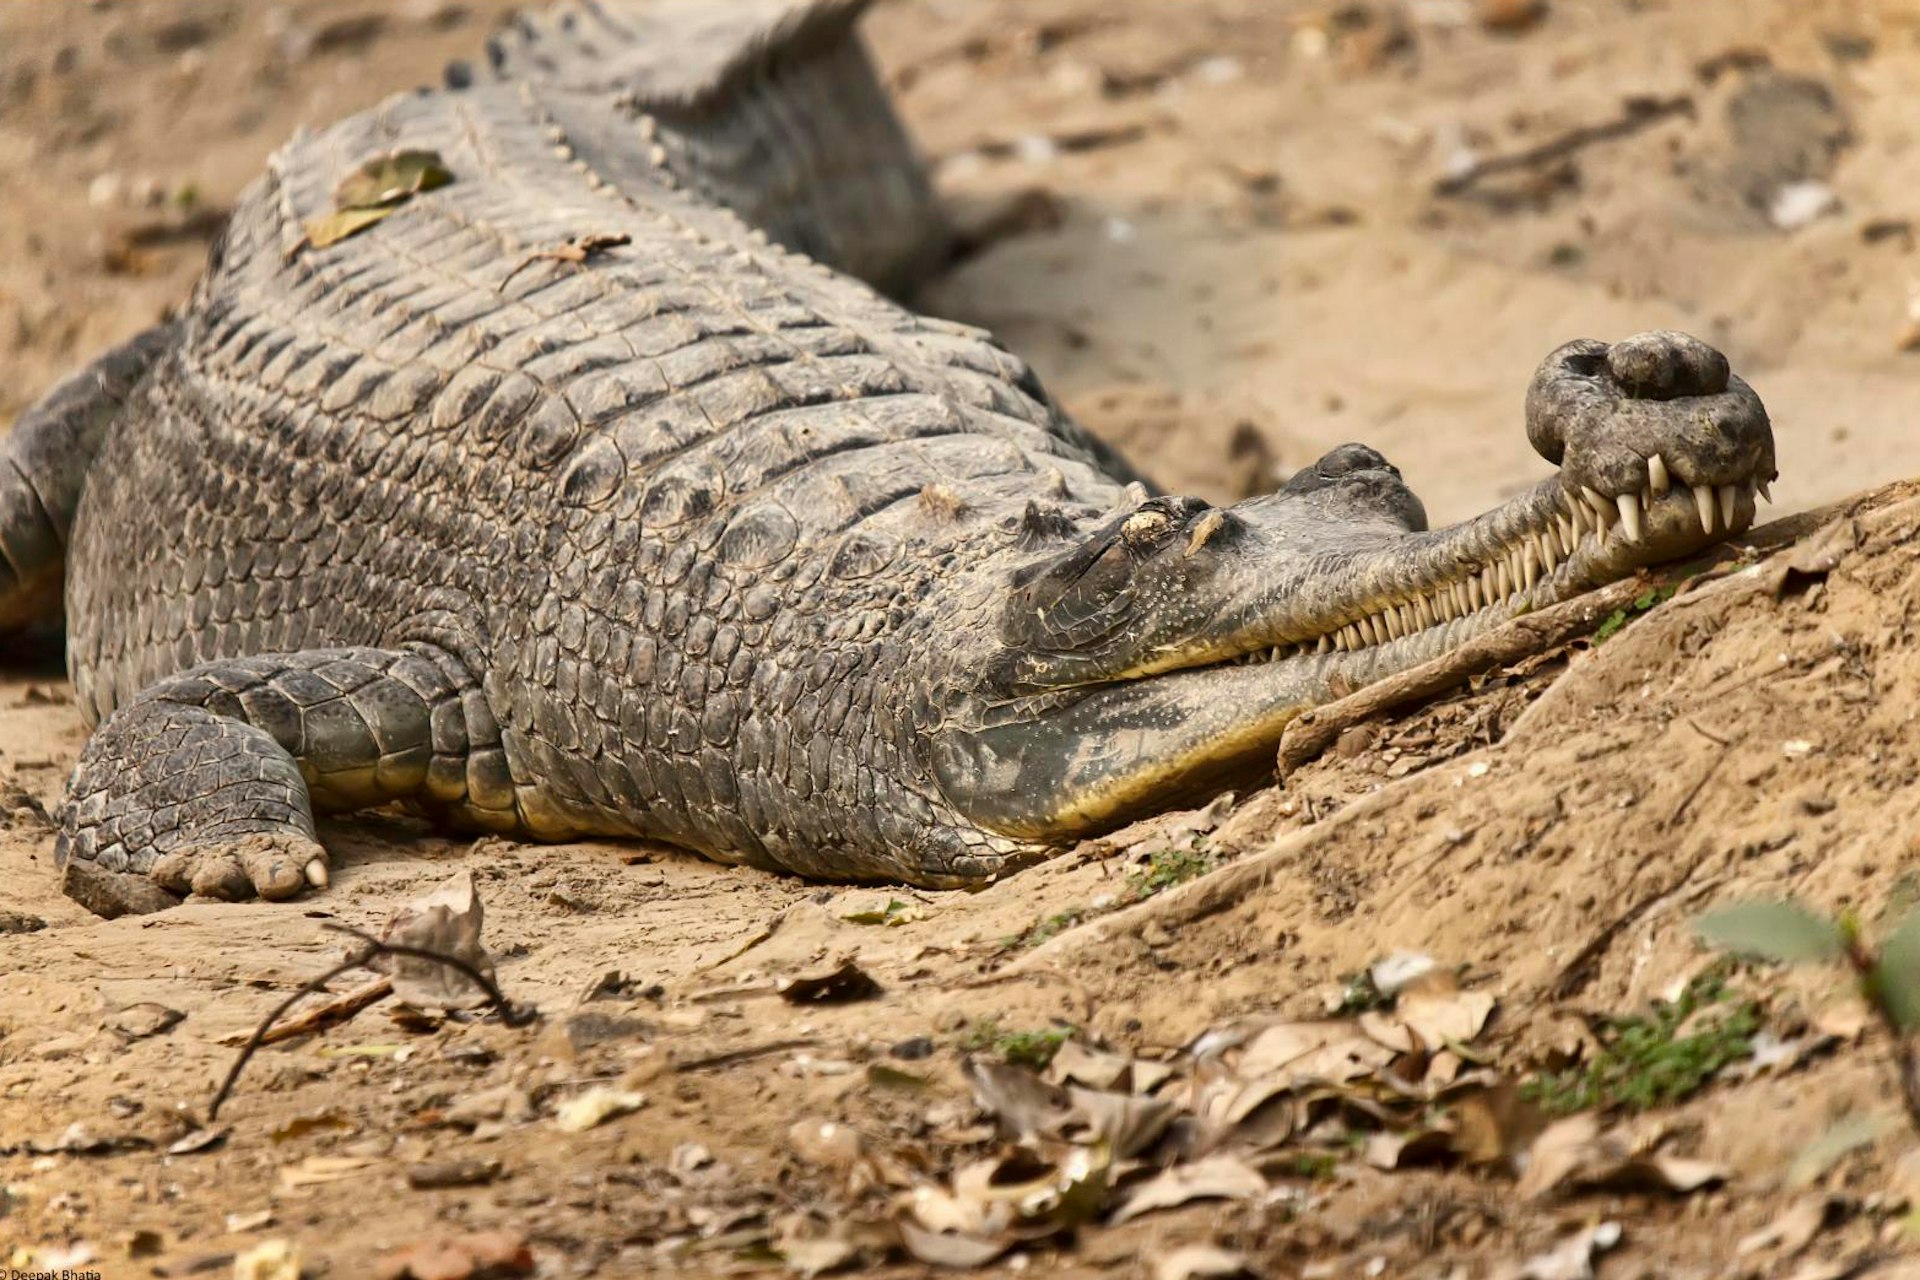 Gharial crocodile sunbathing in the National Zoological Gardens. Image by Zee Pack / CC BY-ND 2.0